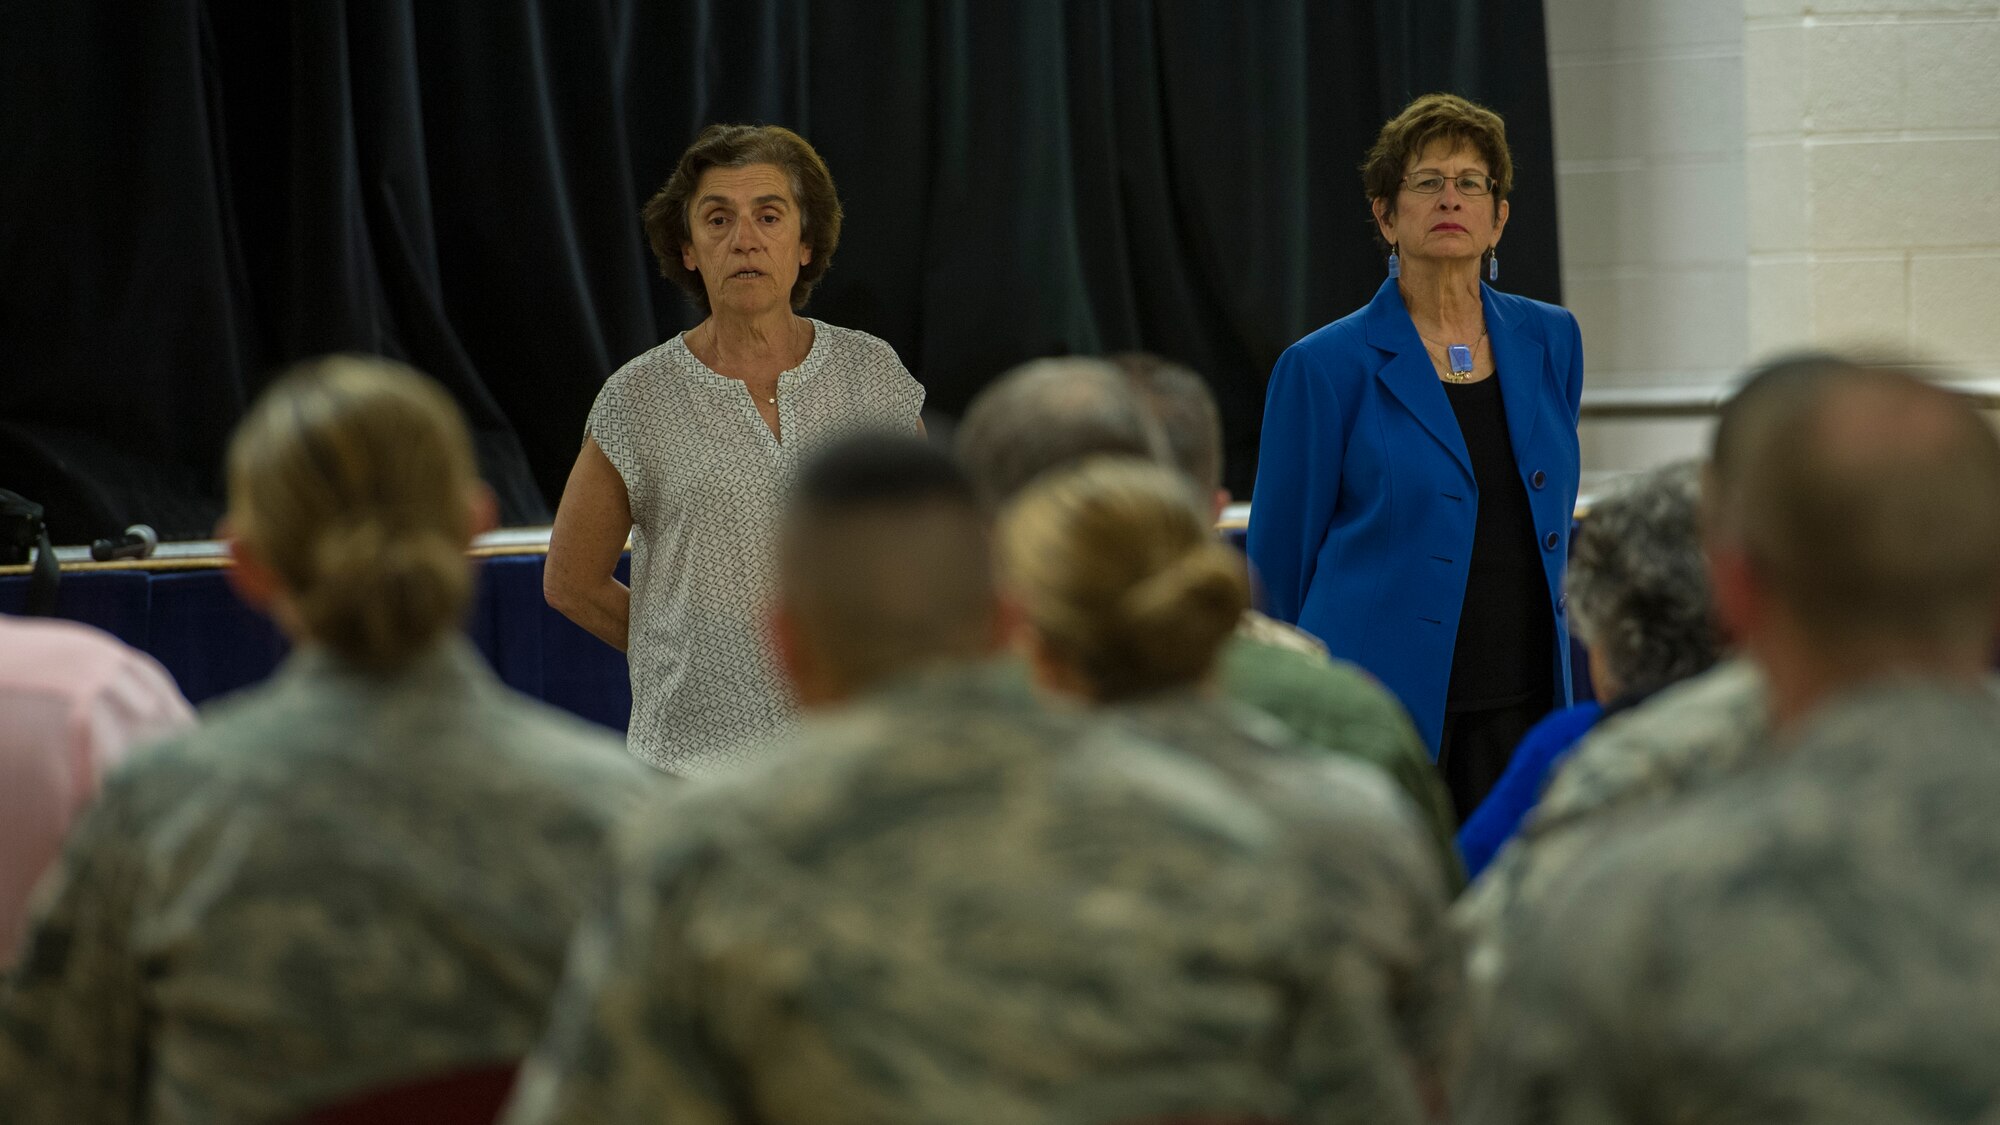 Theresa Dulgov, Holocaust survivor and Dr. Gail Wallen, founder and director of the military holocaust education program answer questions from military members and students during the Holocaust day of remembrance at Holloman Air Force Base, N.M., April 21, 2015. Wallen gave a detailed explanation of the events that took place during the Holocaust, her two guests then told their personal experiences of living through the tragedy as well. (U.S. Air Force photo by Airman 1st Class Aaron Montoya / Released)